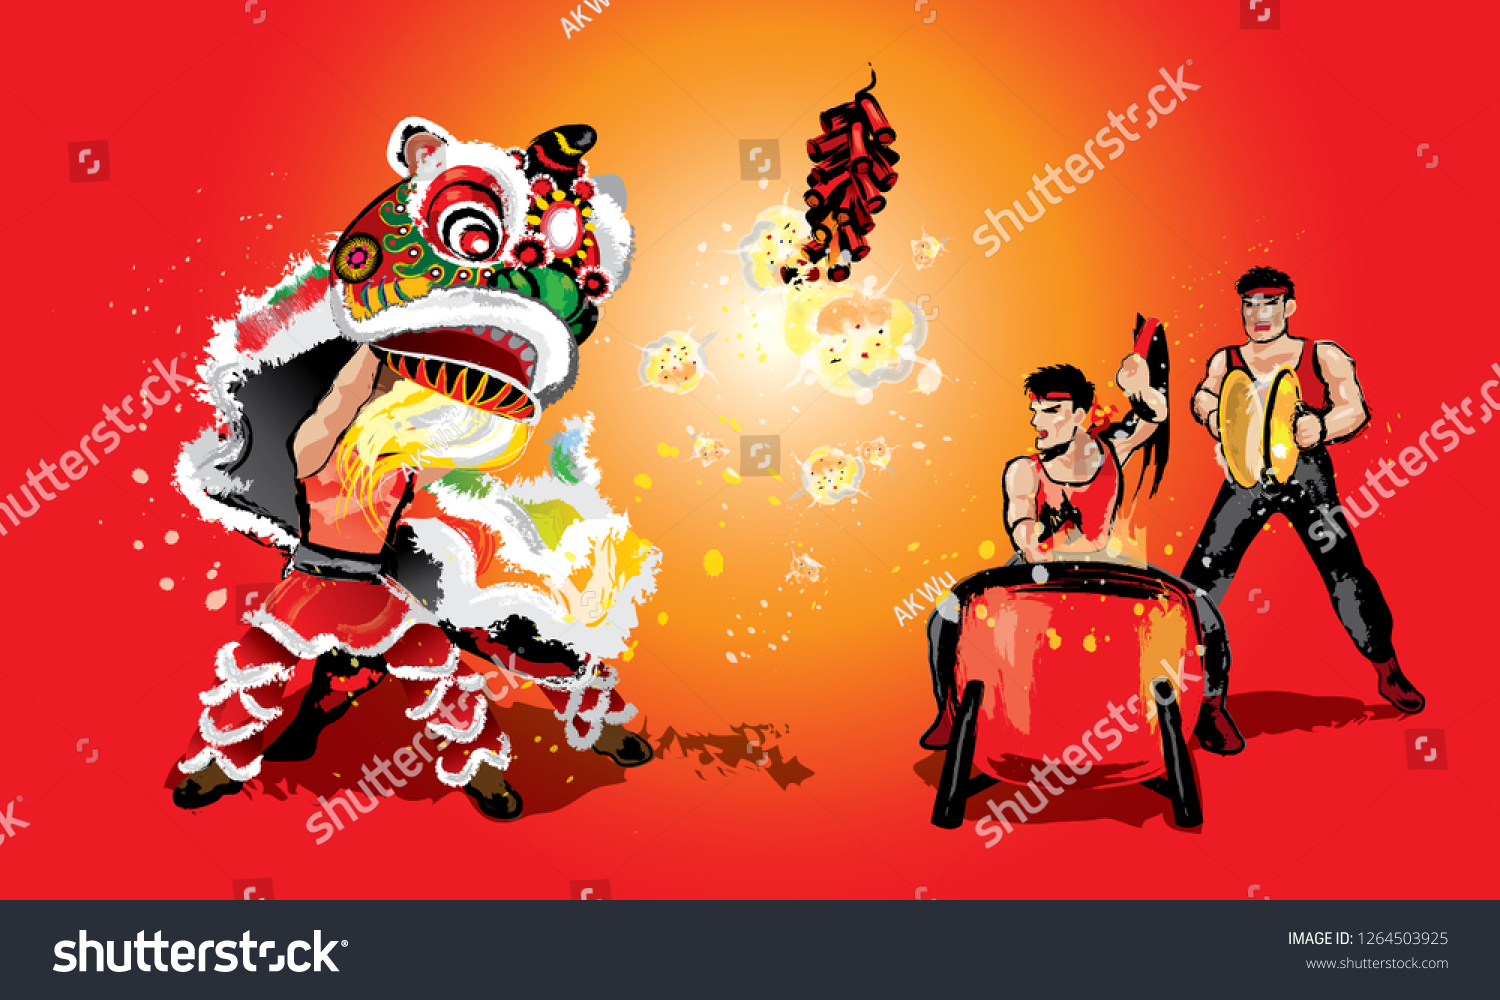 A Chinese lion raising it's head, firecrackers and a team playing drums and cymbal. In various colors and presented in splashing ink drawing style. Vector.  #1264503925